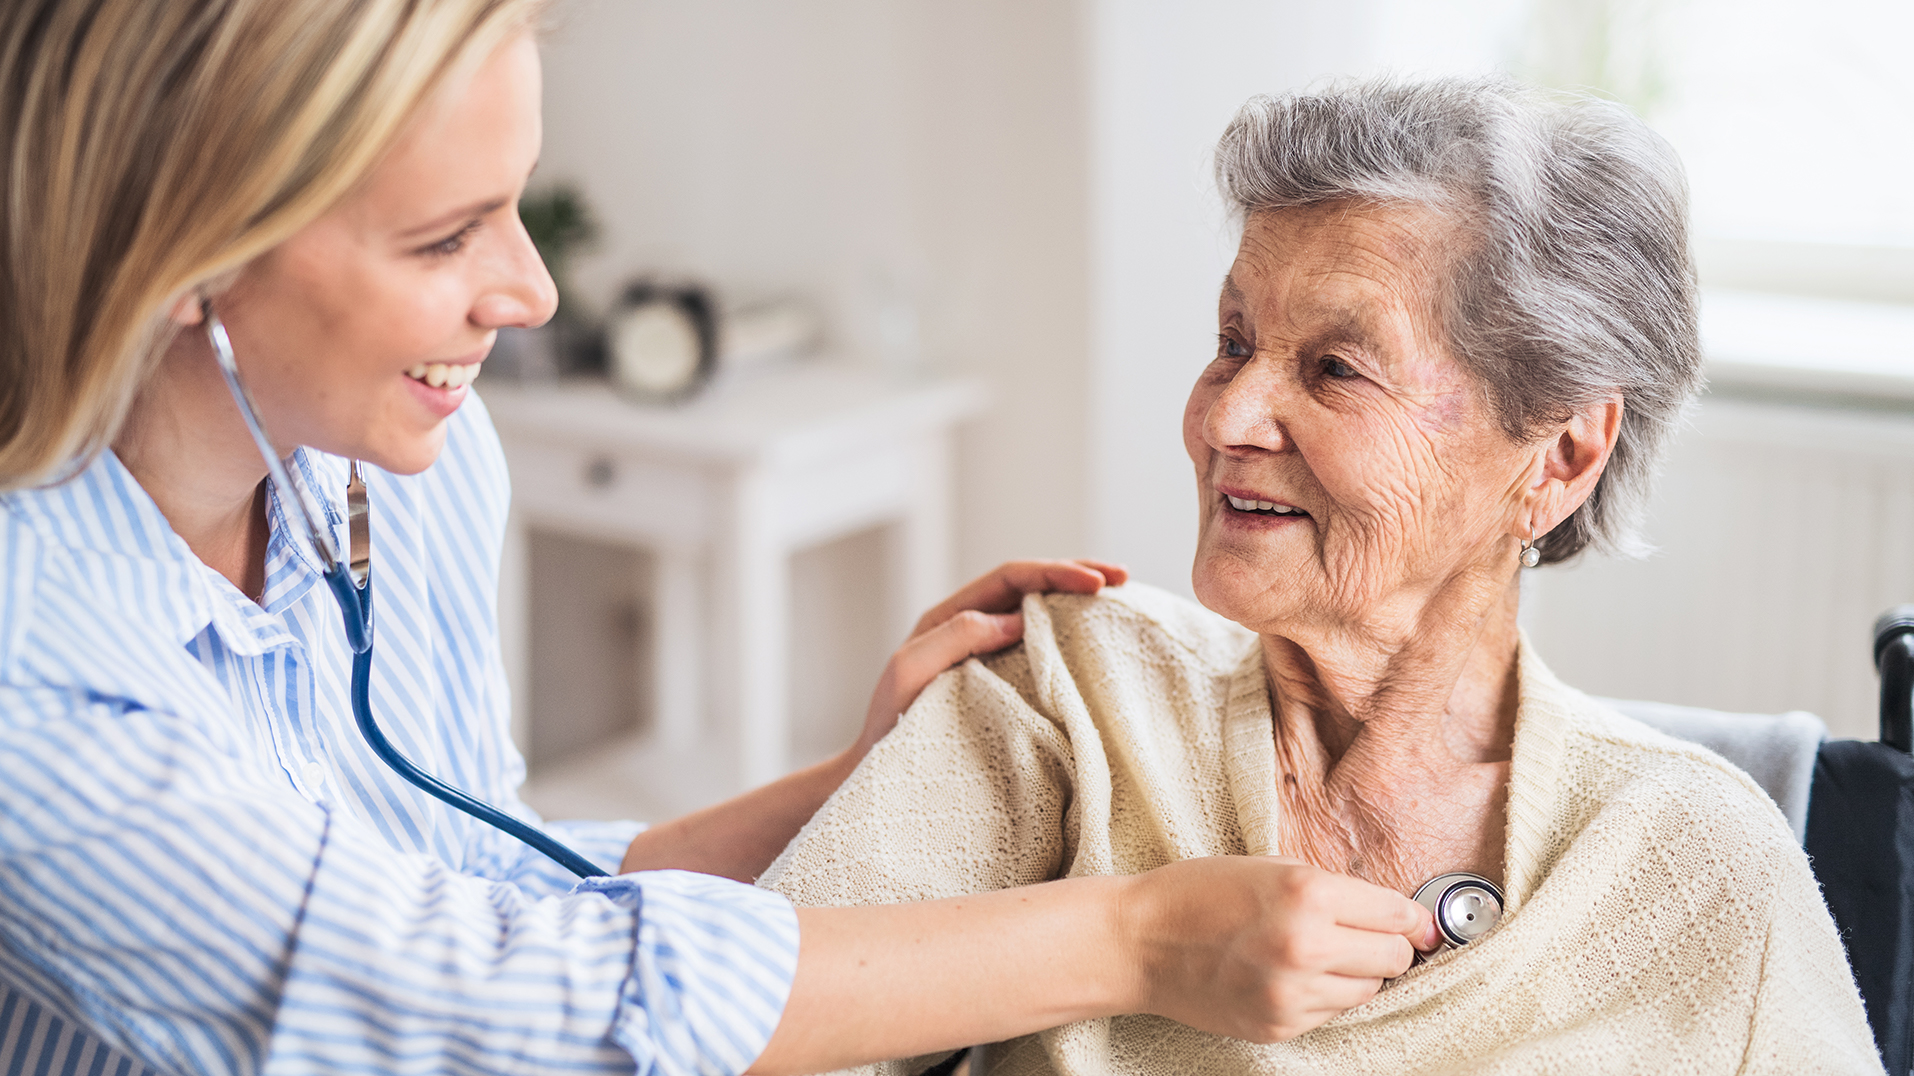 A nurse listens to an elderly patient's heart with stethoscope.